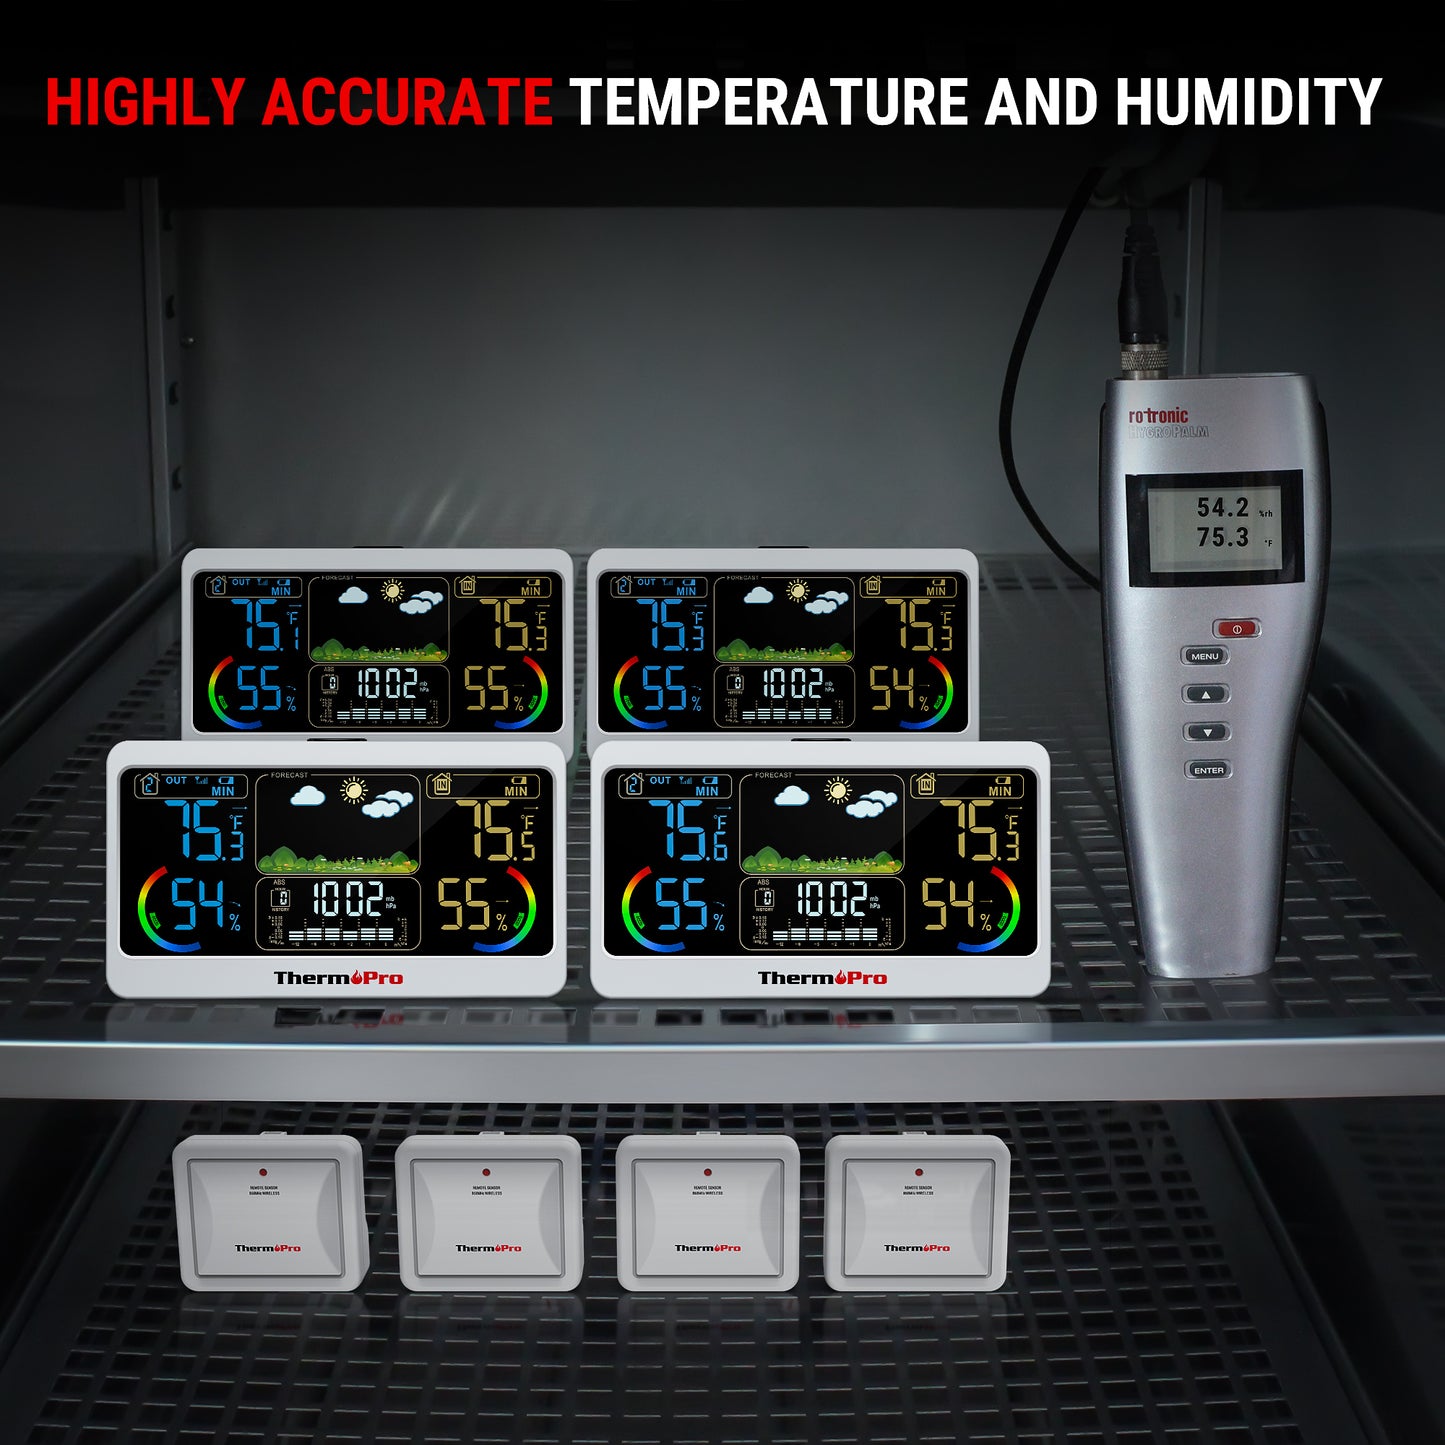 ThermoPro TP68C Wireless 150M Forecast Weather Station Chargeable Big Display Outdoor And Indoor Thermometer Hygrometer